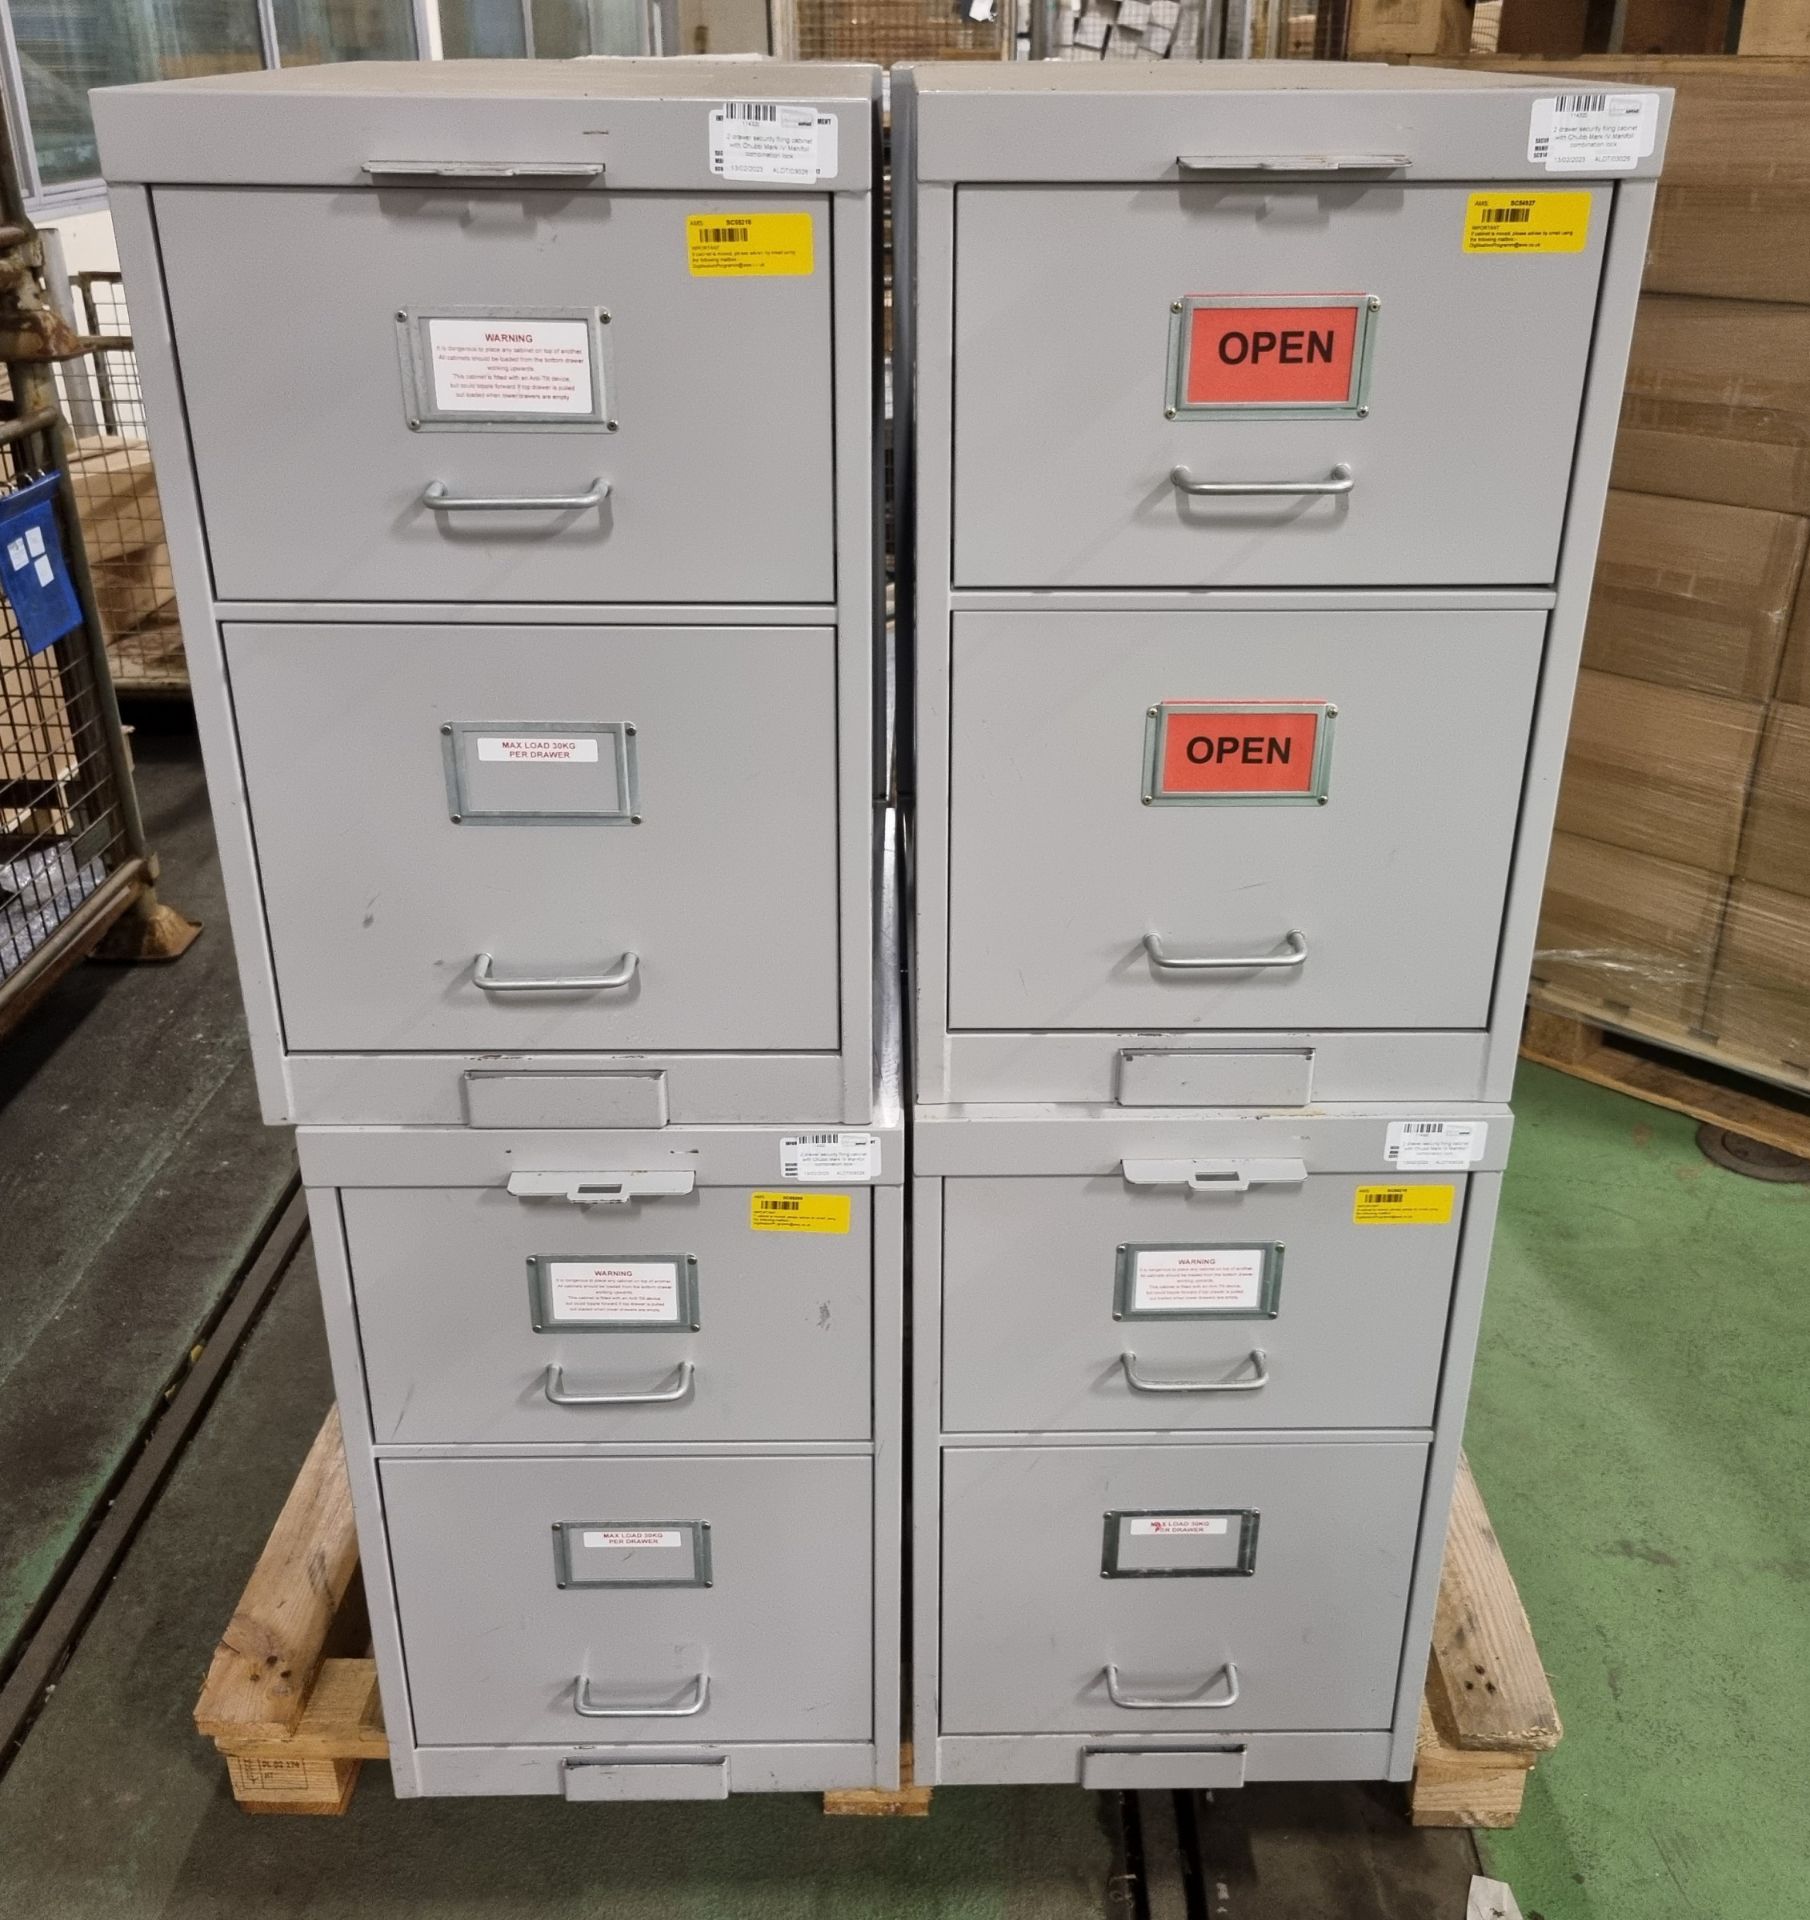 8x 2 drawer security filing cabinet with Chubb Mark IV Manifoil combination lock (in the drawers)